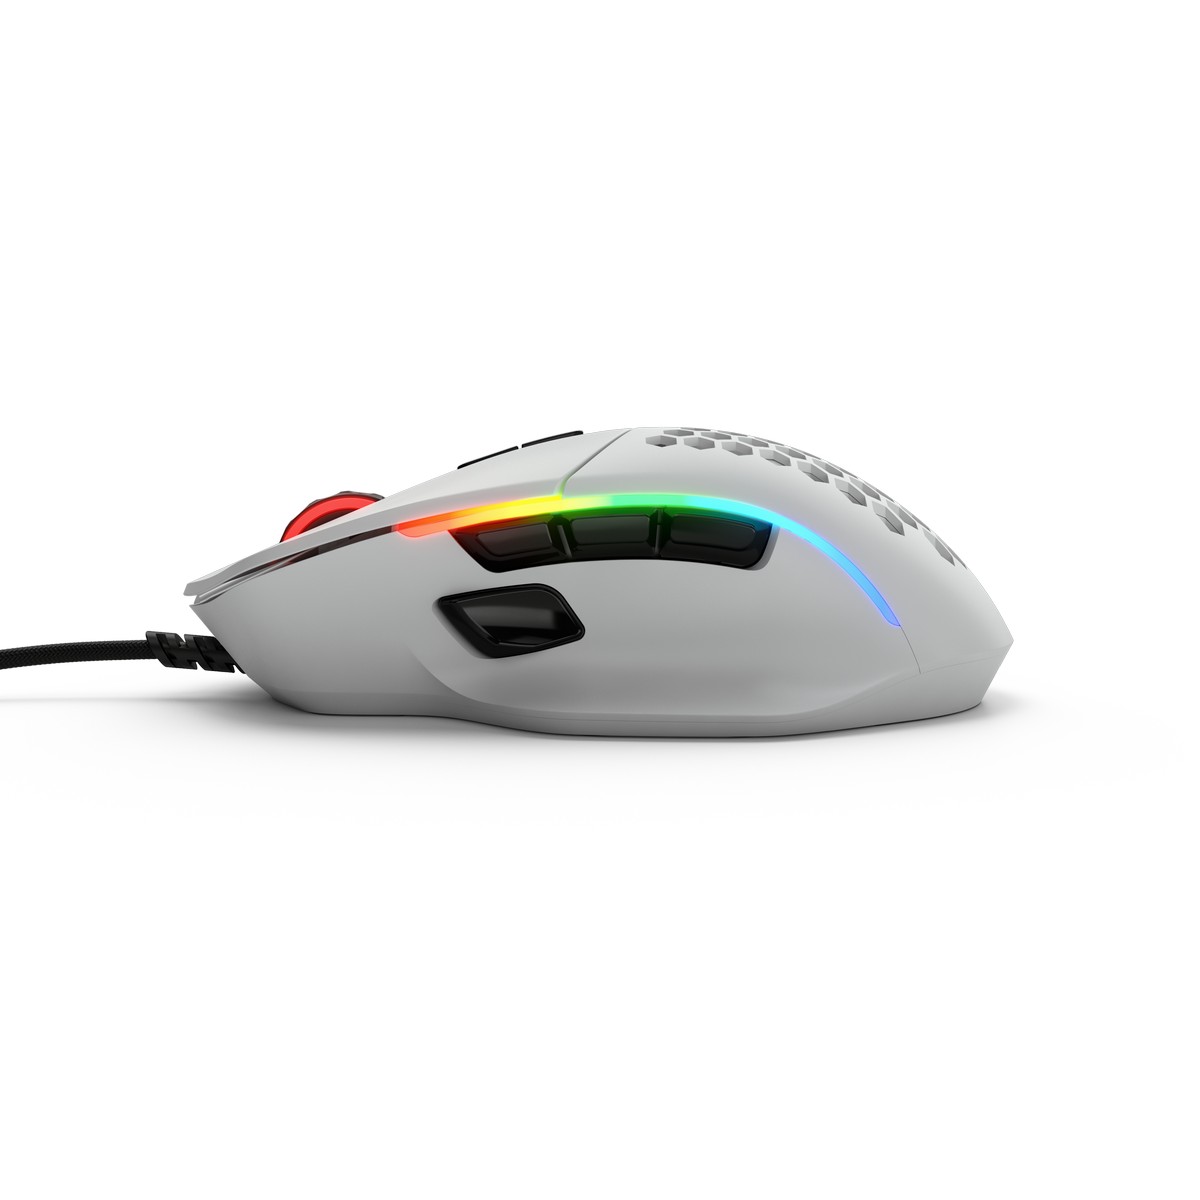 Glorious - Glorious Model I USB RGB Lightweight Gaming Mouse - Matte White (GLO-MS-I-MB)